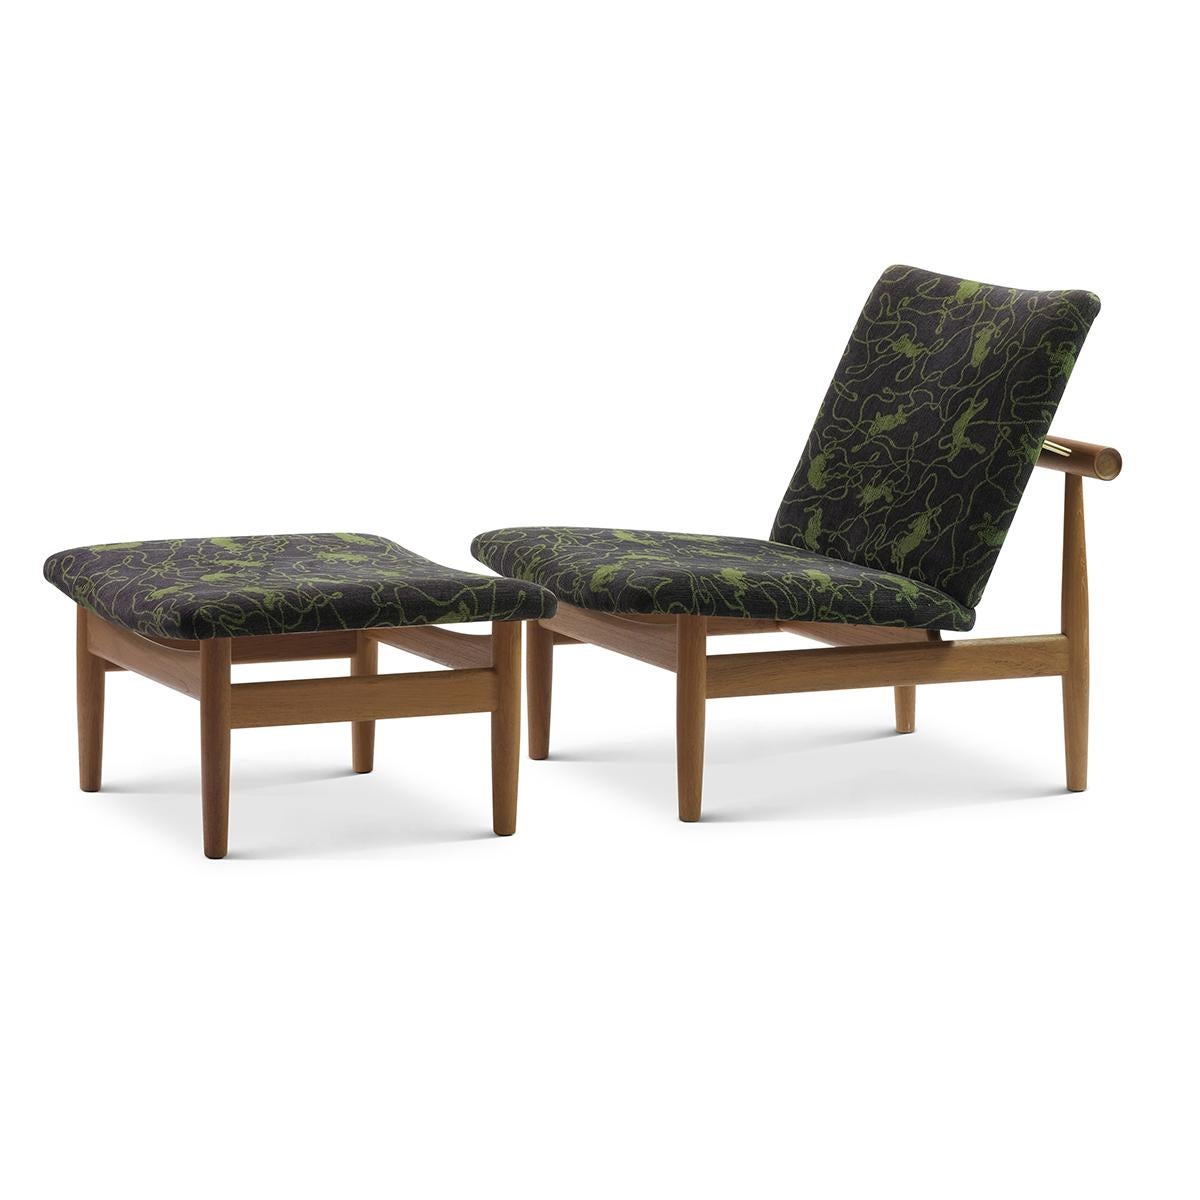 Chair and footstool designed by Finn Juhl in 1957, relaunched in 2007.
Manufactured by House of Finn Juhl in Denmark.

Finn Juhl’s partnership with the furniture manufacturer France & Son gave birth to a series of furniture well-suited for